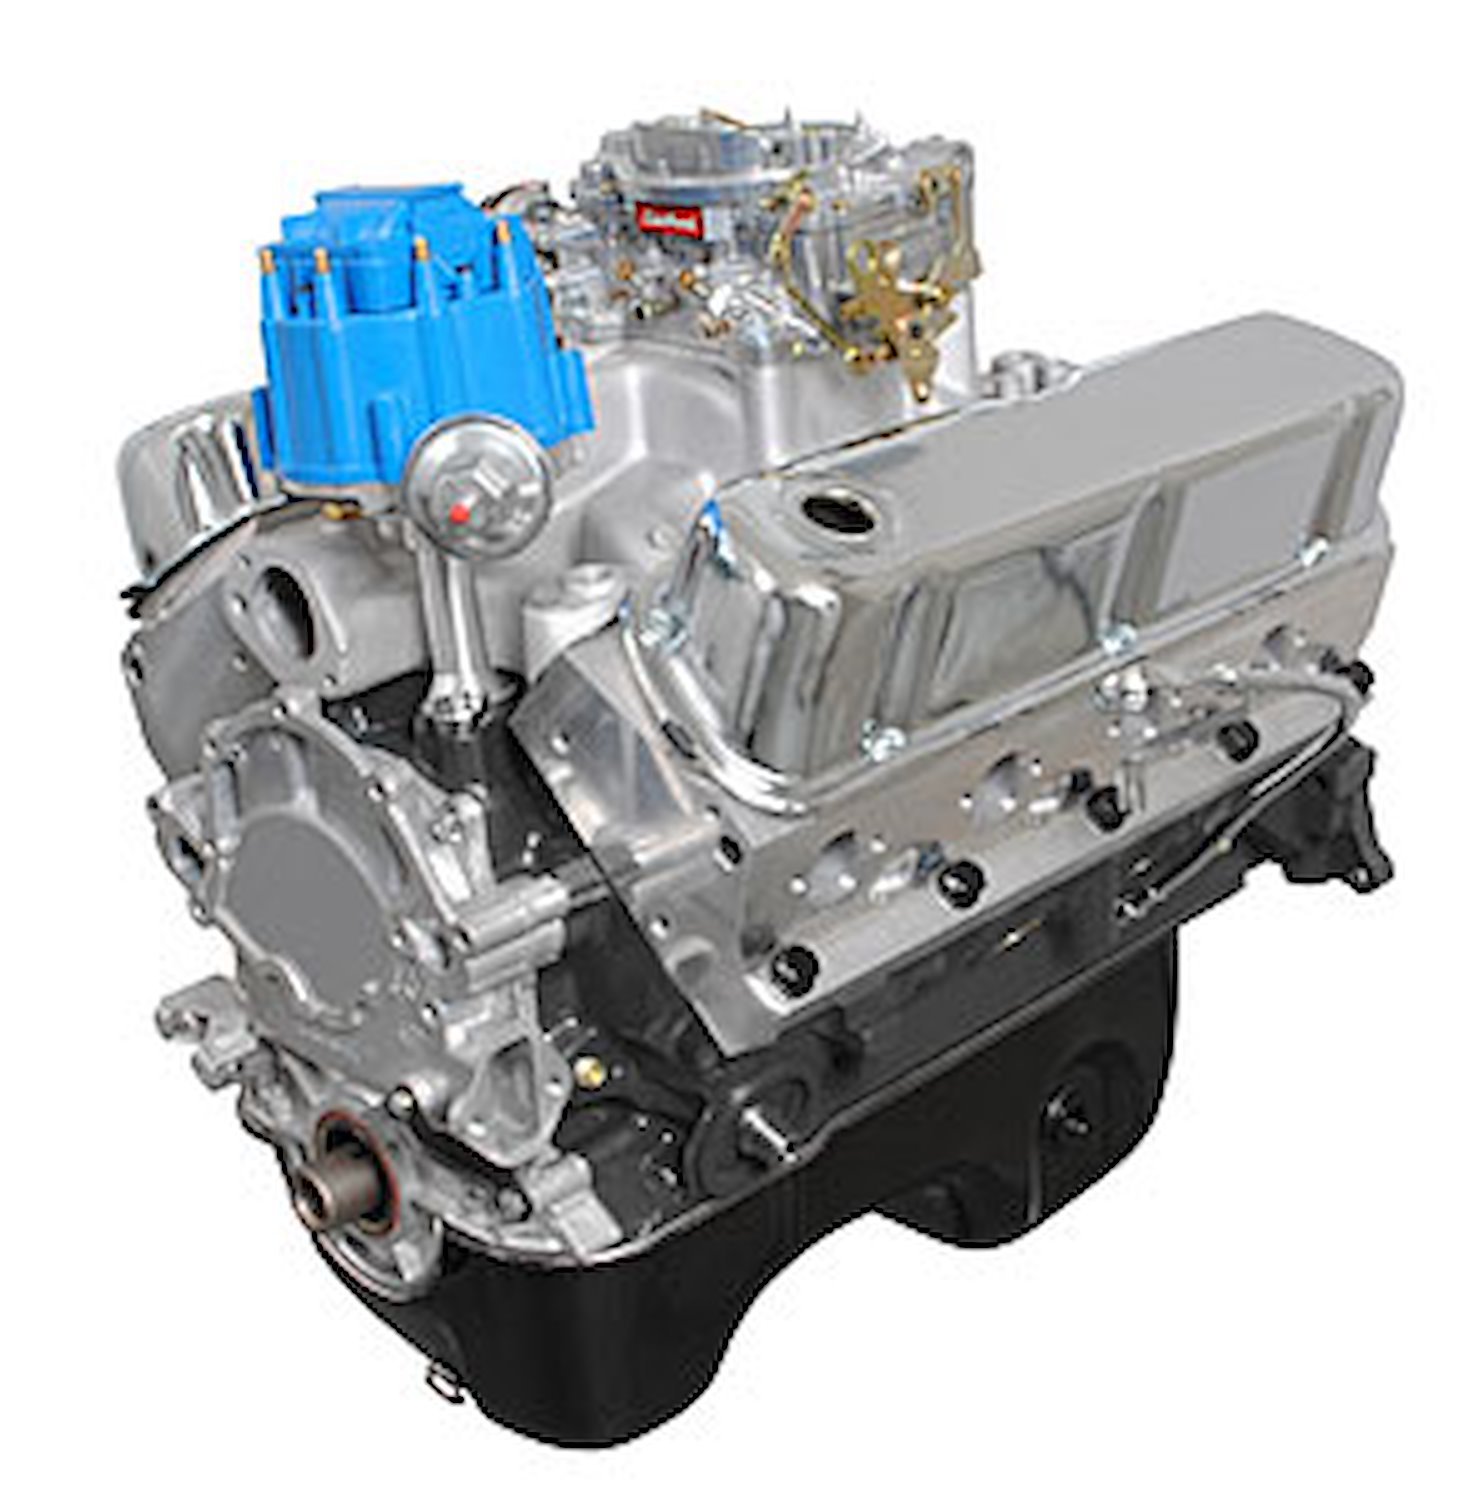 Ford 331cid Value Power Dress Stroker Crate Engine 375HP/390TQ